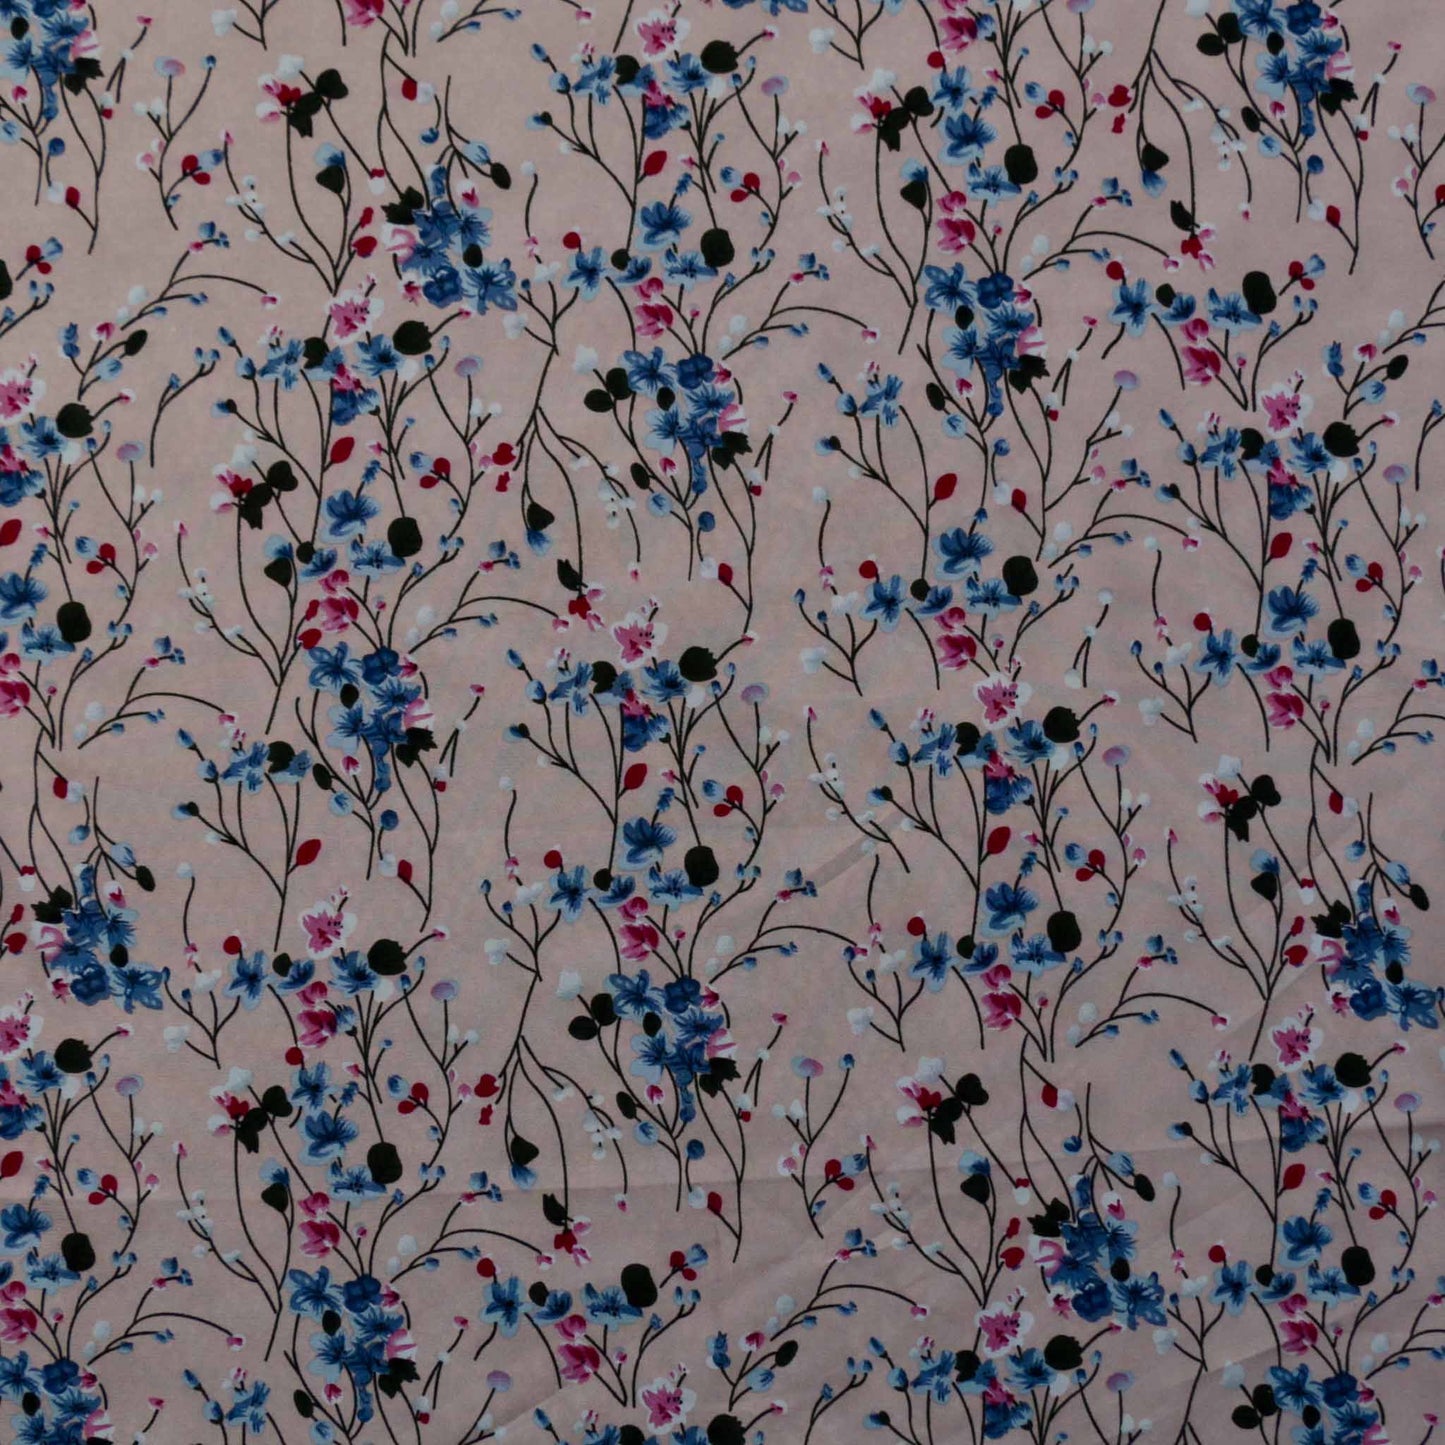 stretchy pink chiffon floral dressmaking fabric with blue flowers